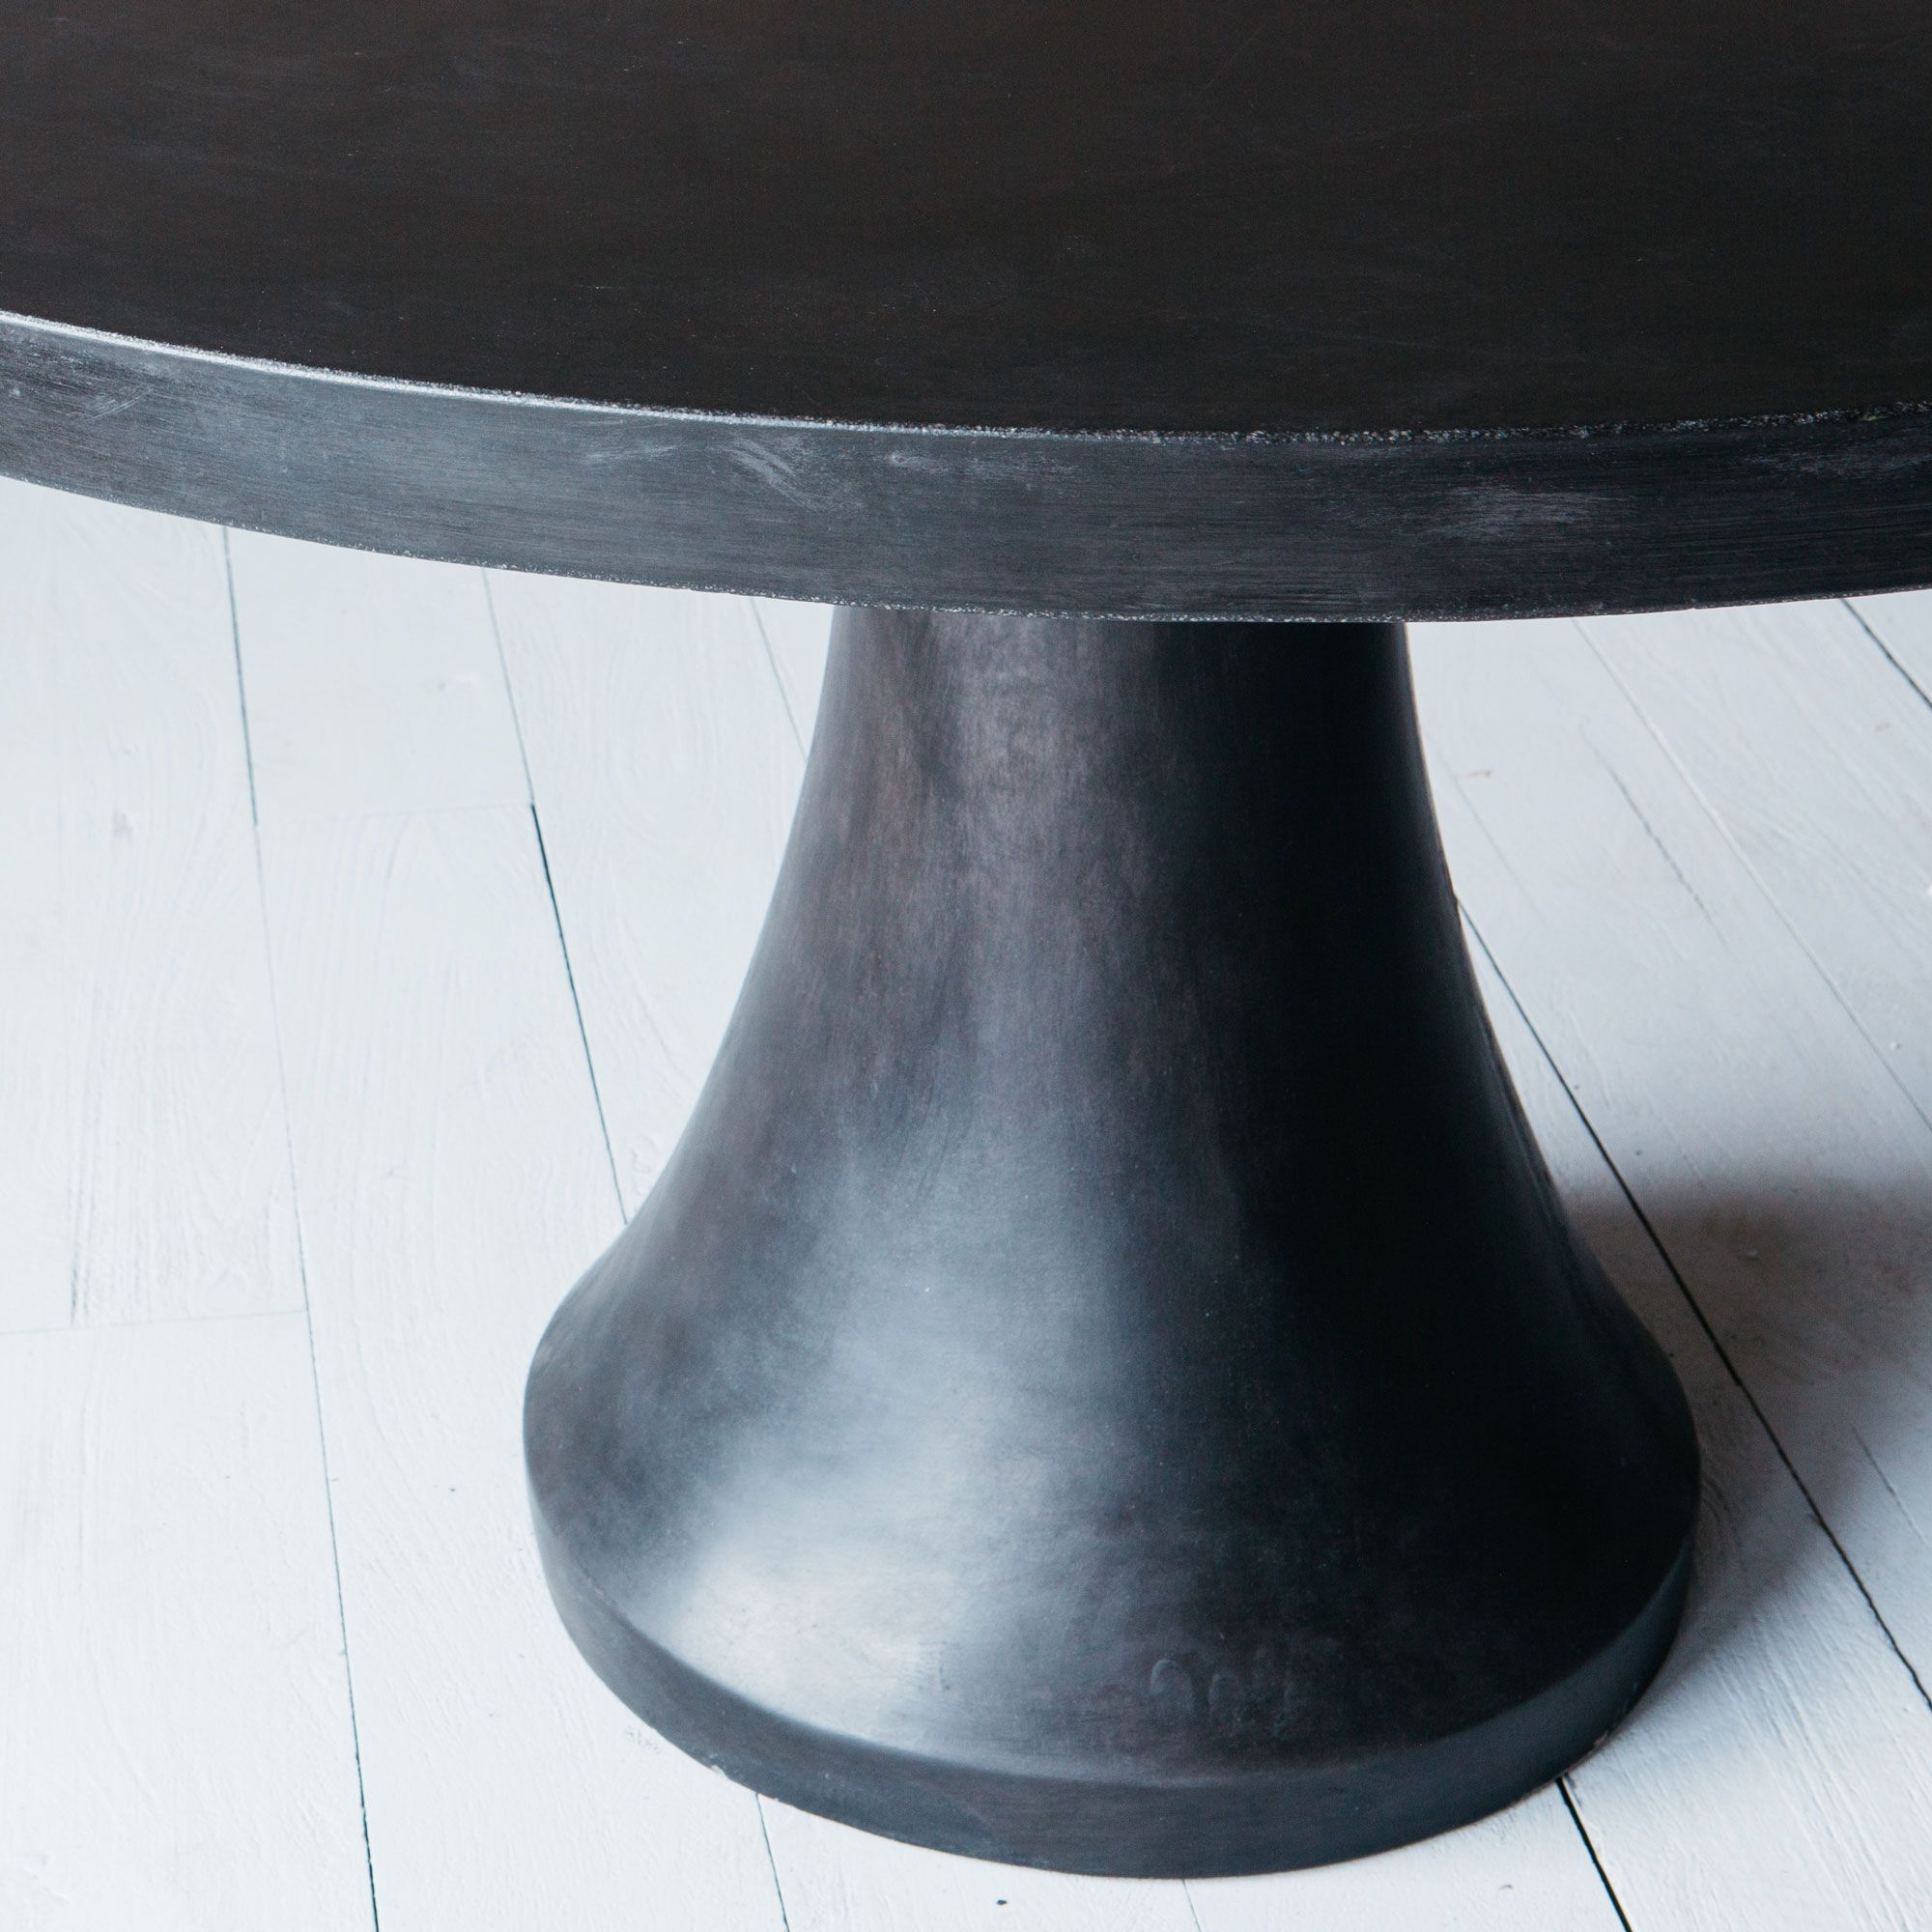 Goswell Black Cement Round Dining Table